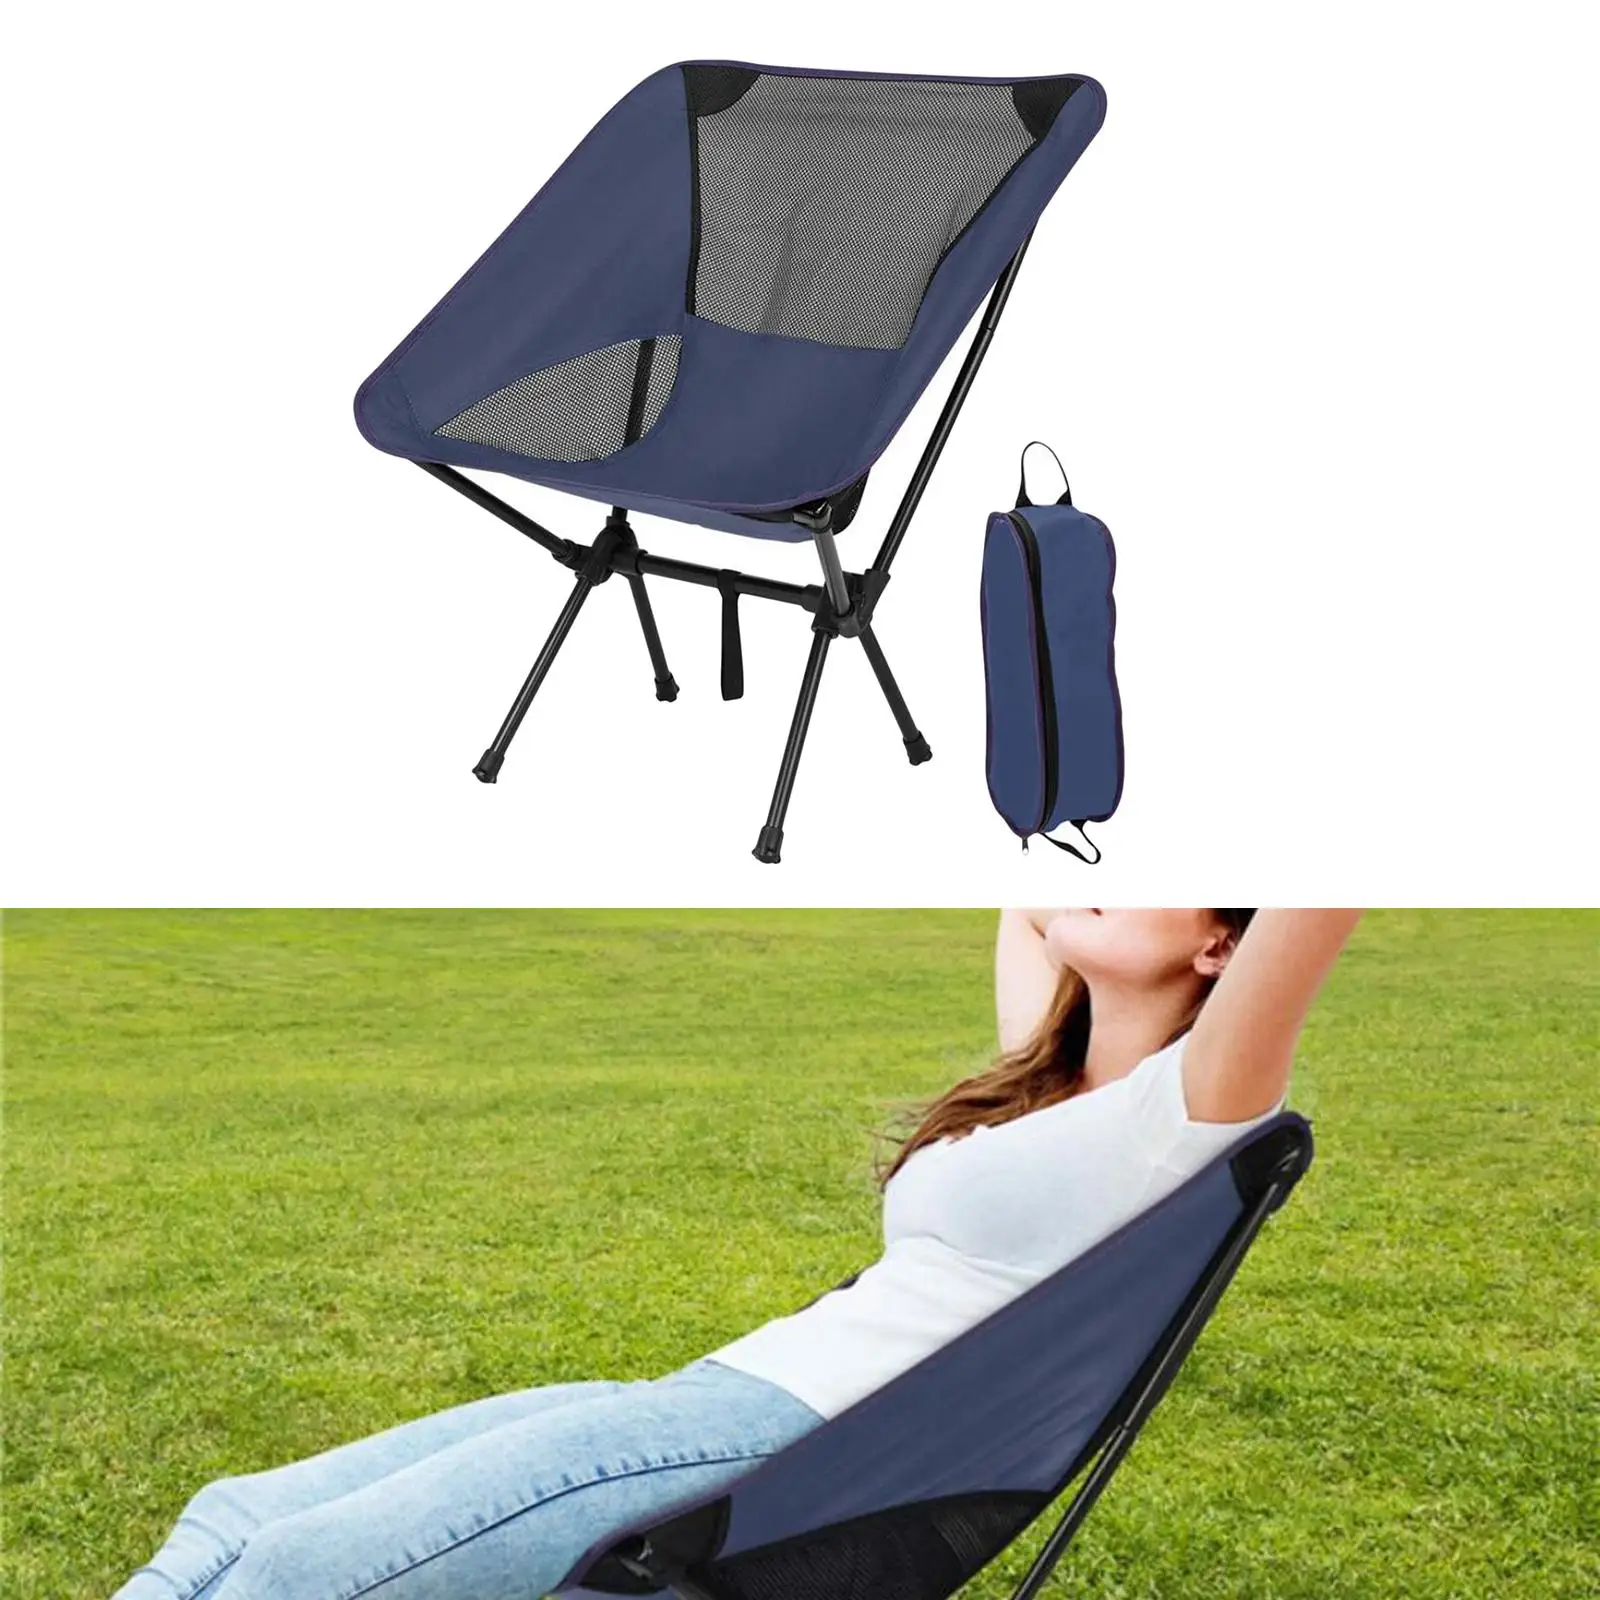 Oxford Cloth Folding Chair Heavy Duty Backrest Seat for Camping Fishing BBQ Backpacking Beach Painting